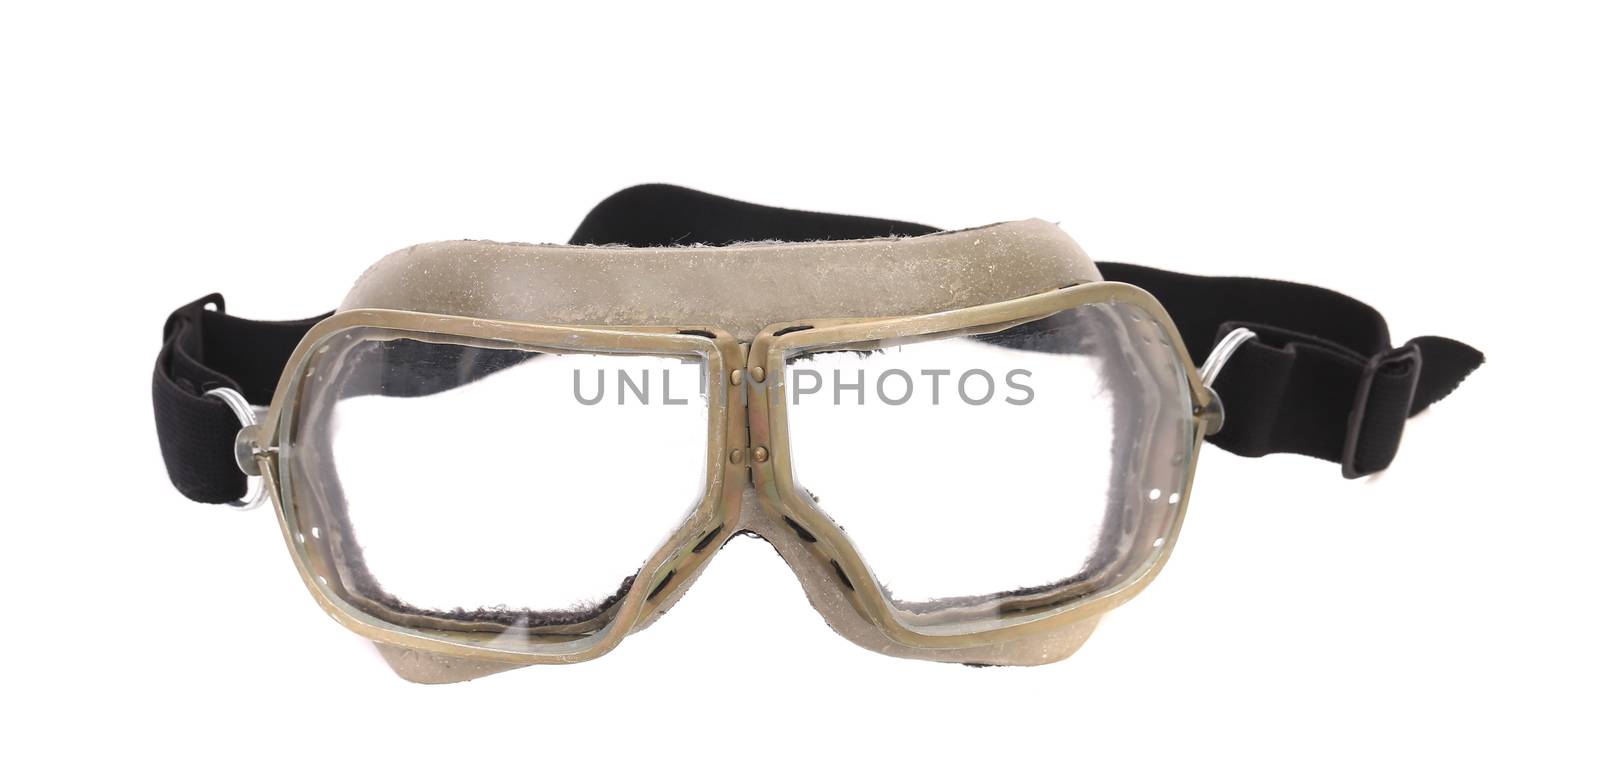 White protective glasses. Isolated on a white background.